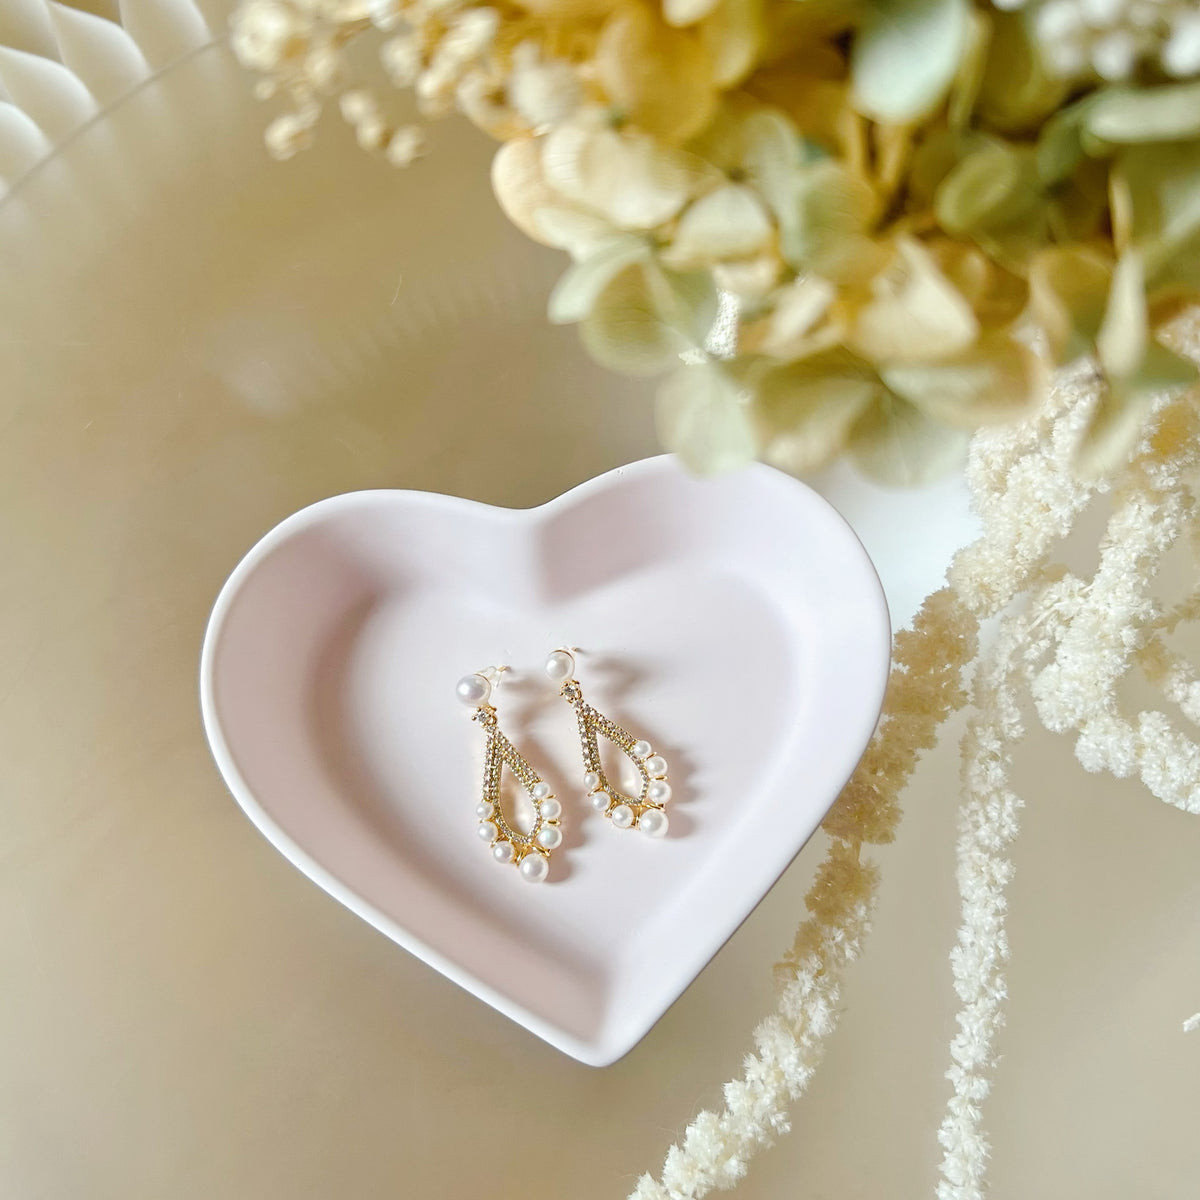 Small Heart Decorative Trays | Handmade Trinket Dishes Candle Tray | LMJ Candles